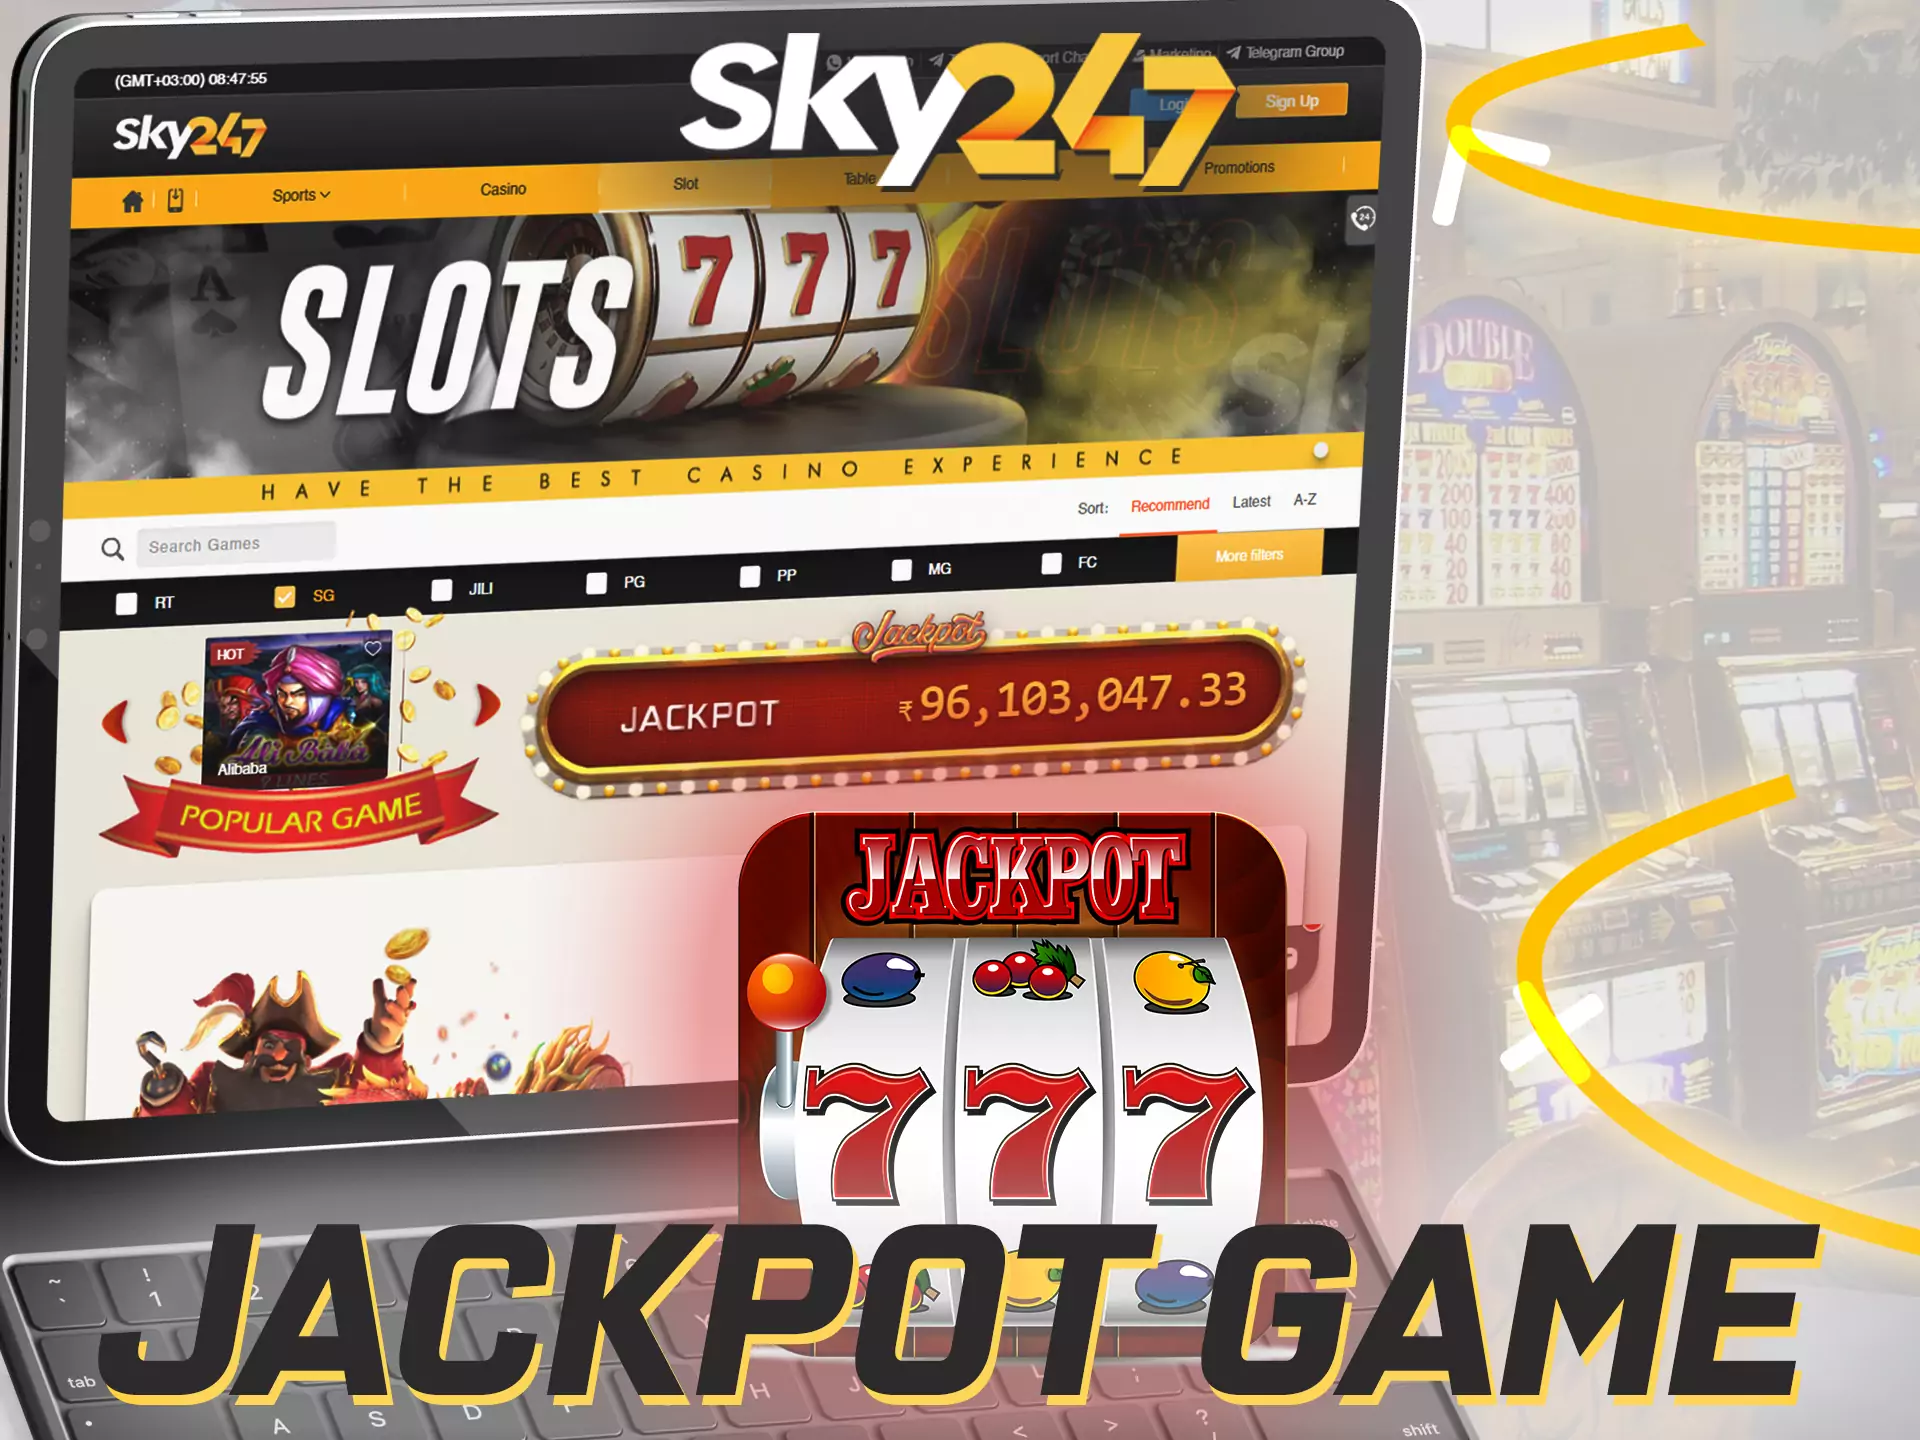 Play a jackpot game and win a fortune on Sky247.